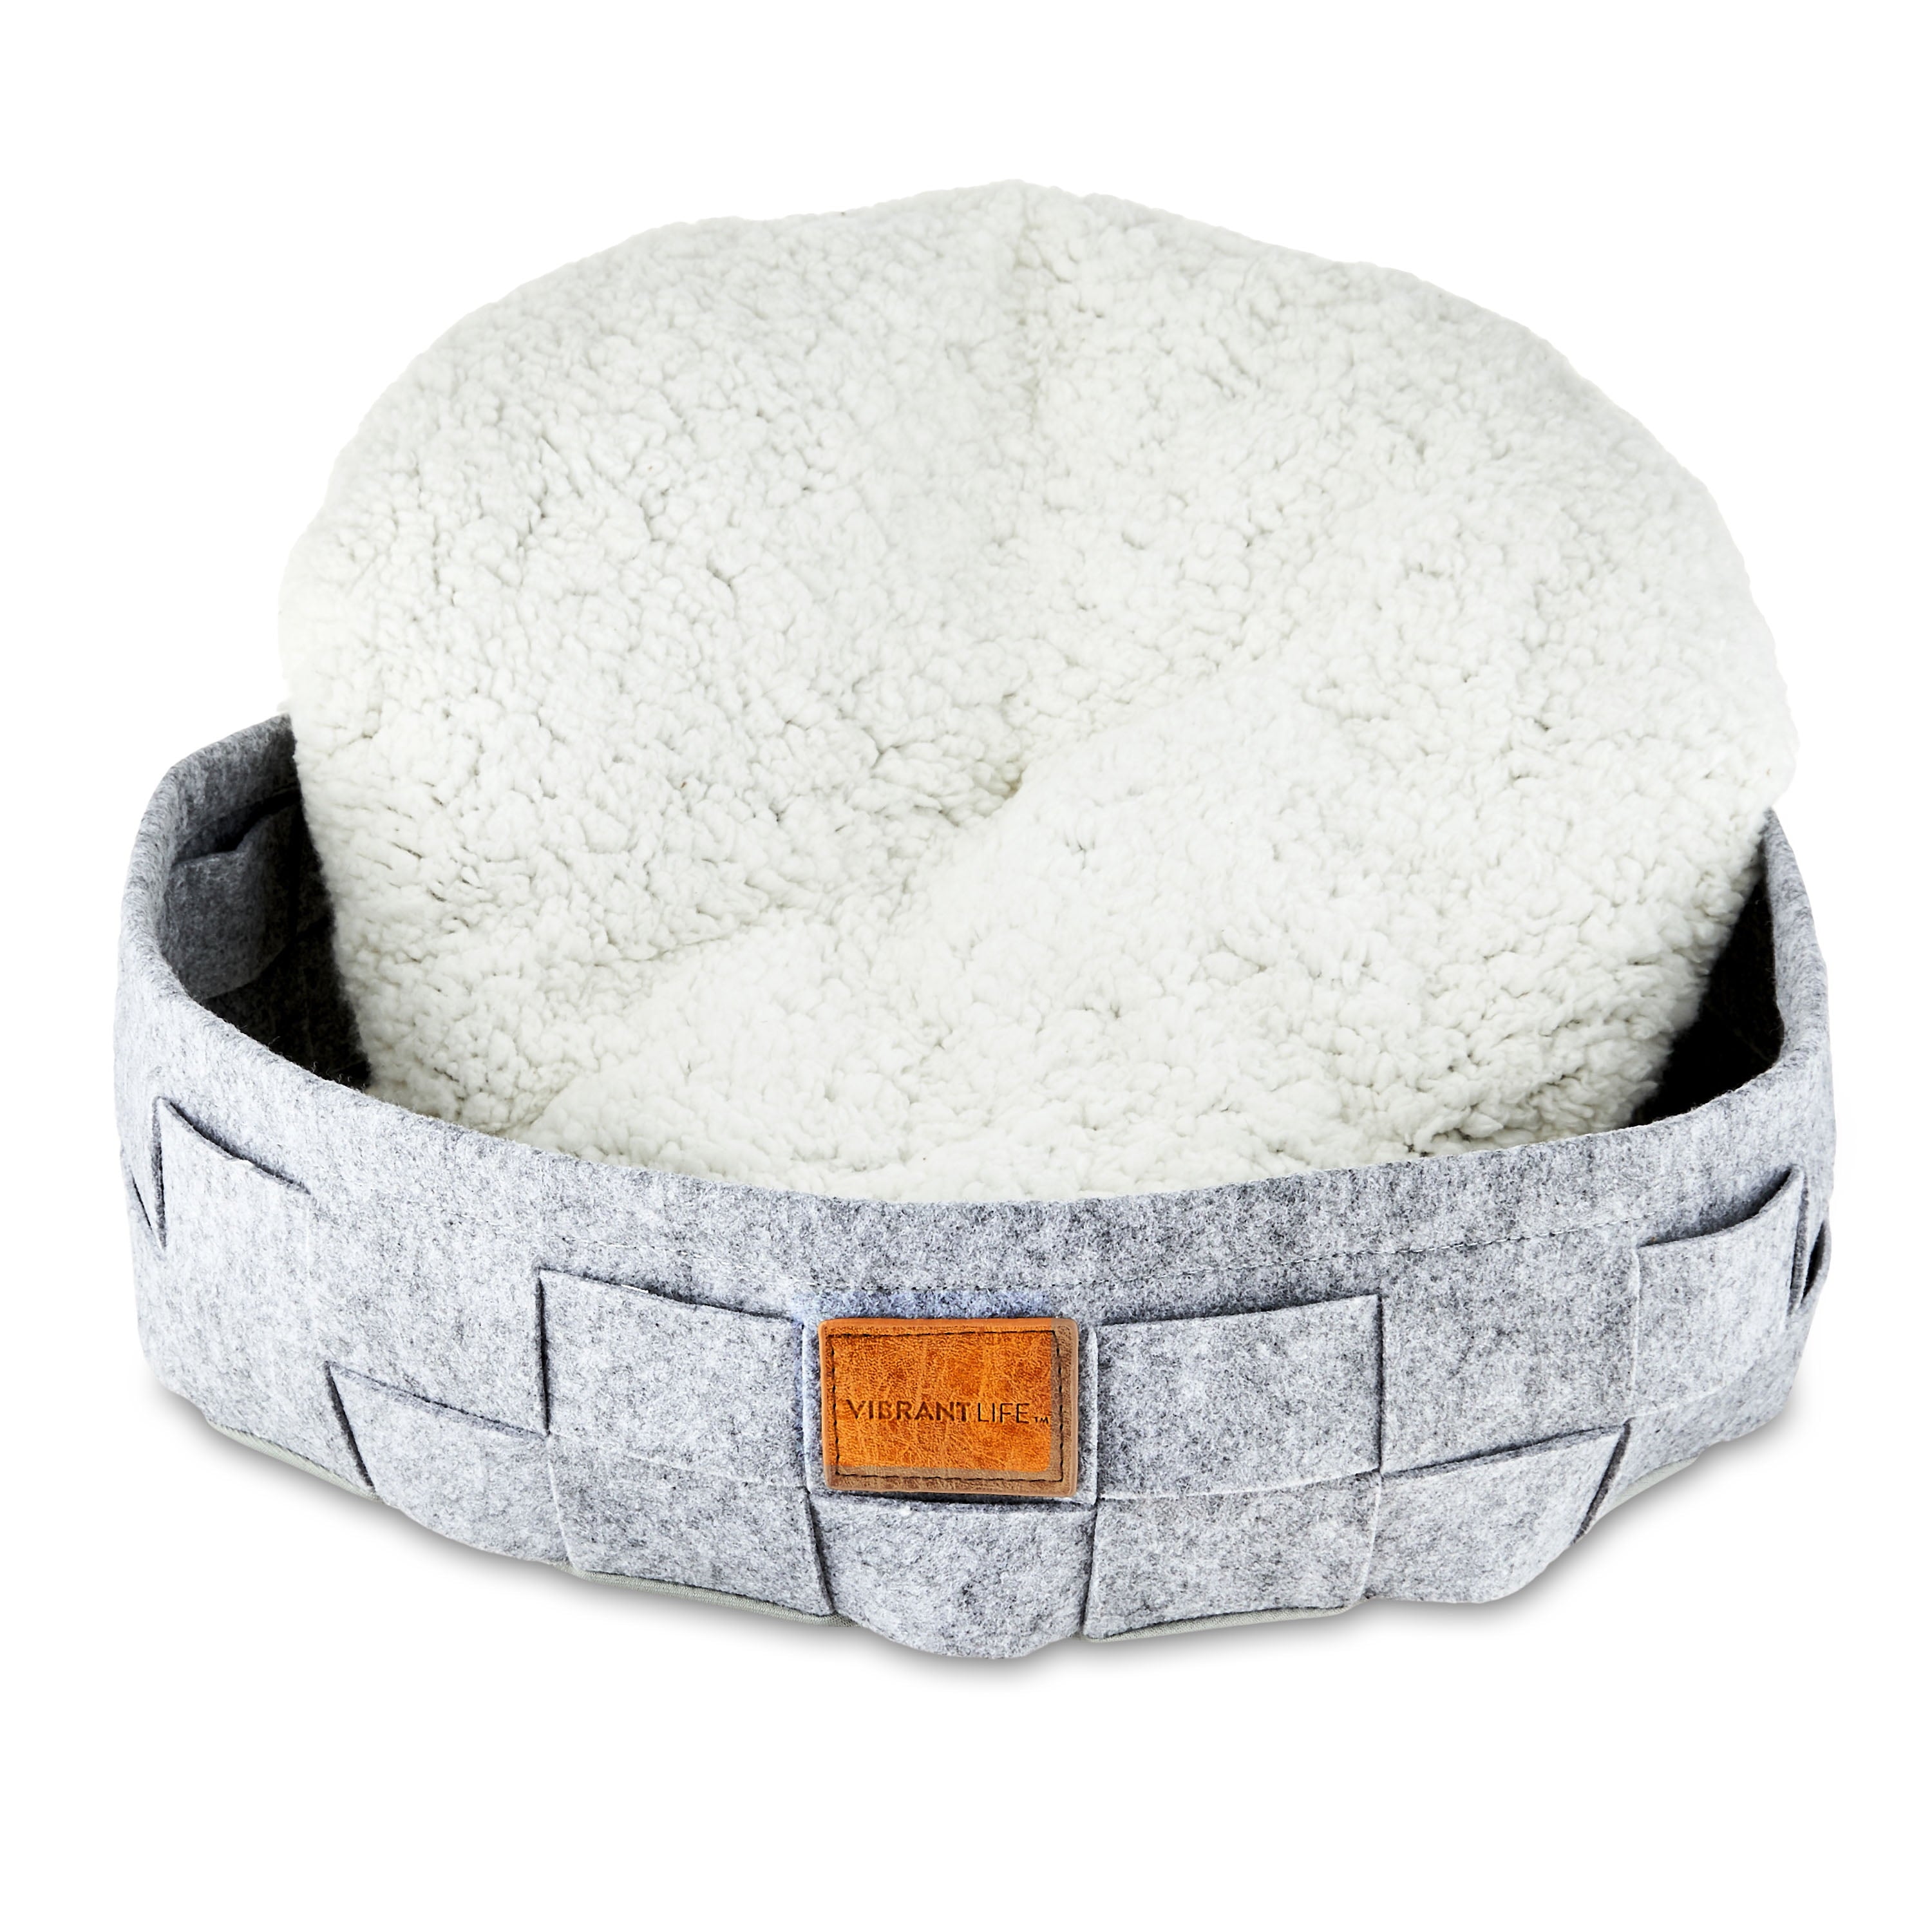 Wholesale prices with free shipping all over United States Vibrant Life Round Woven Felt Cat Bed, Washable Cushion, Cat Basket, Small Animal Bed - Steven Deals